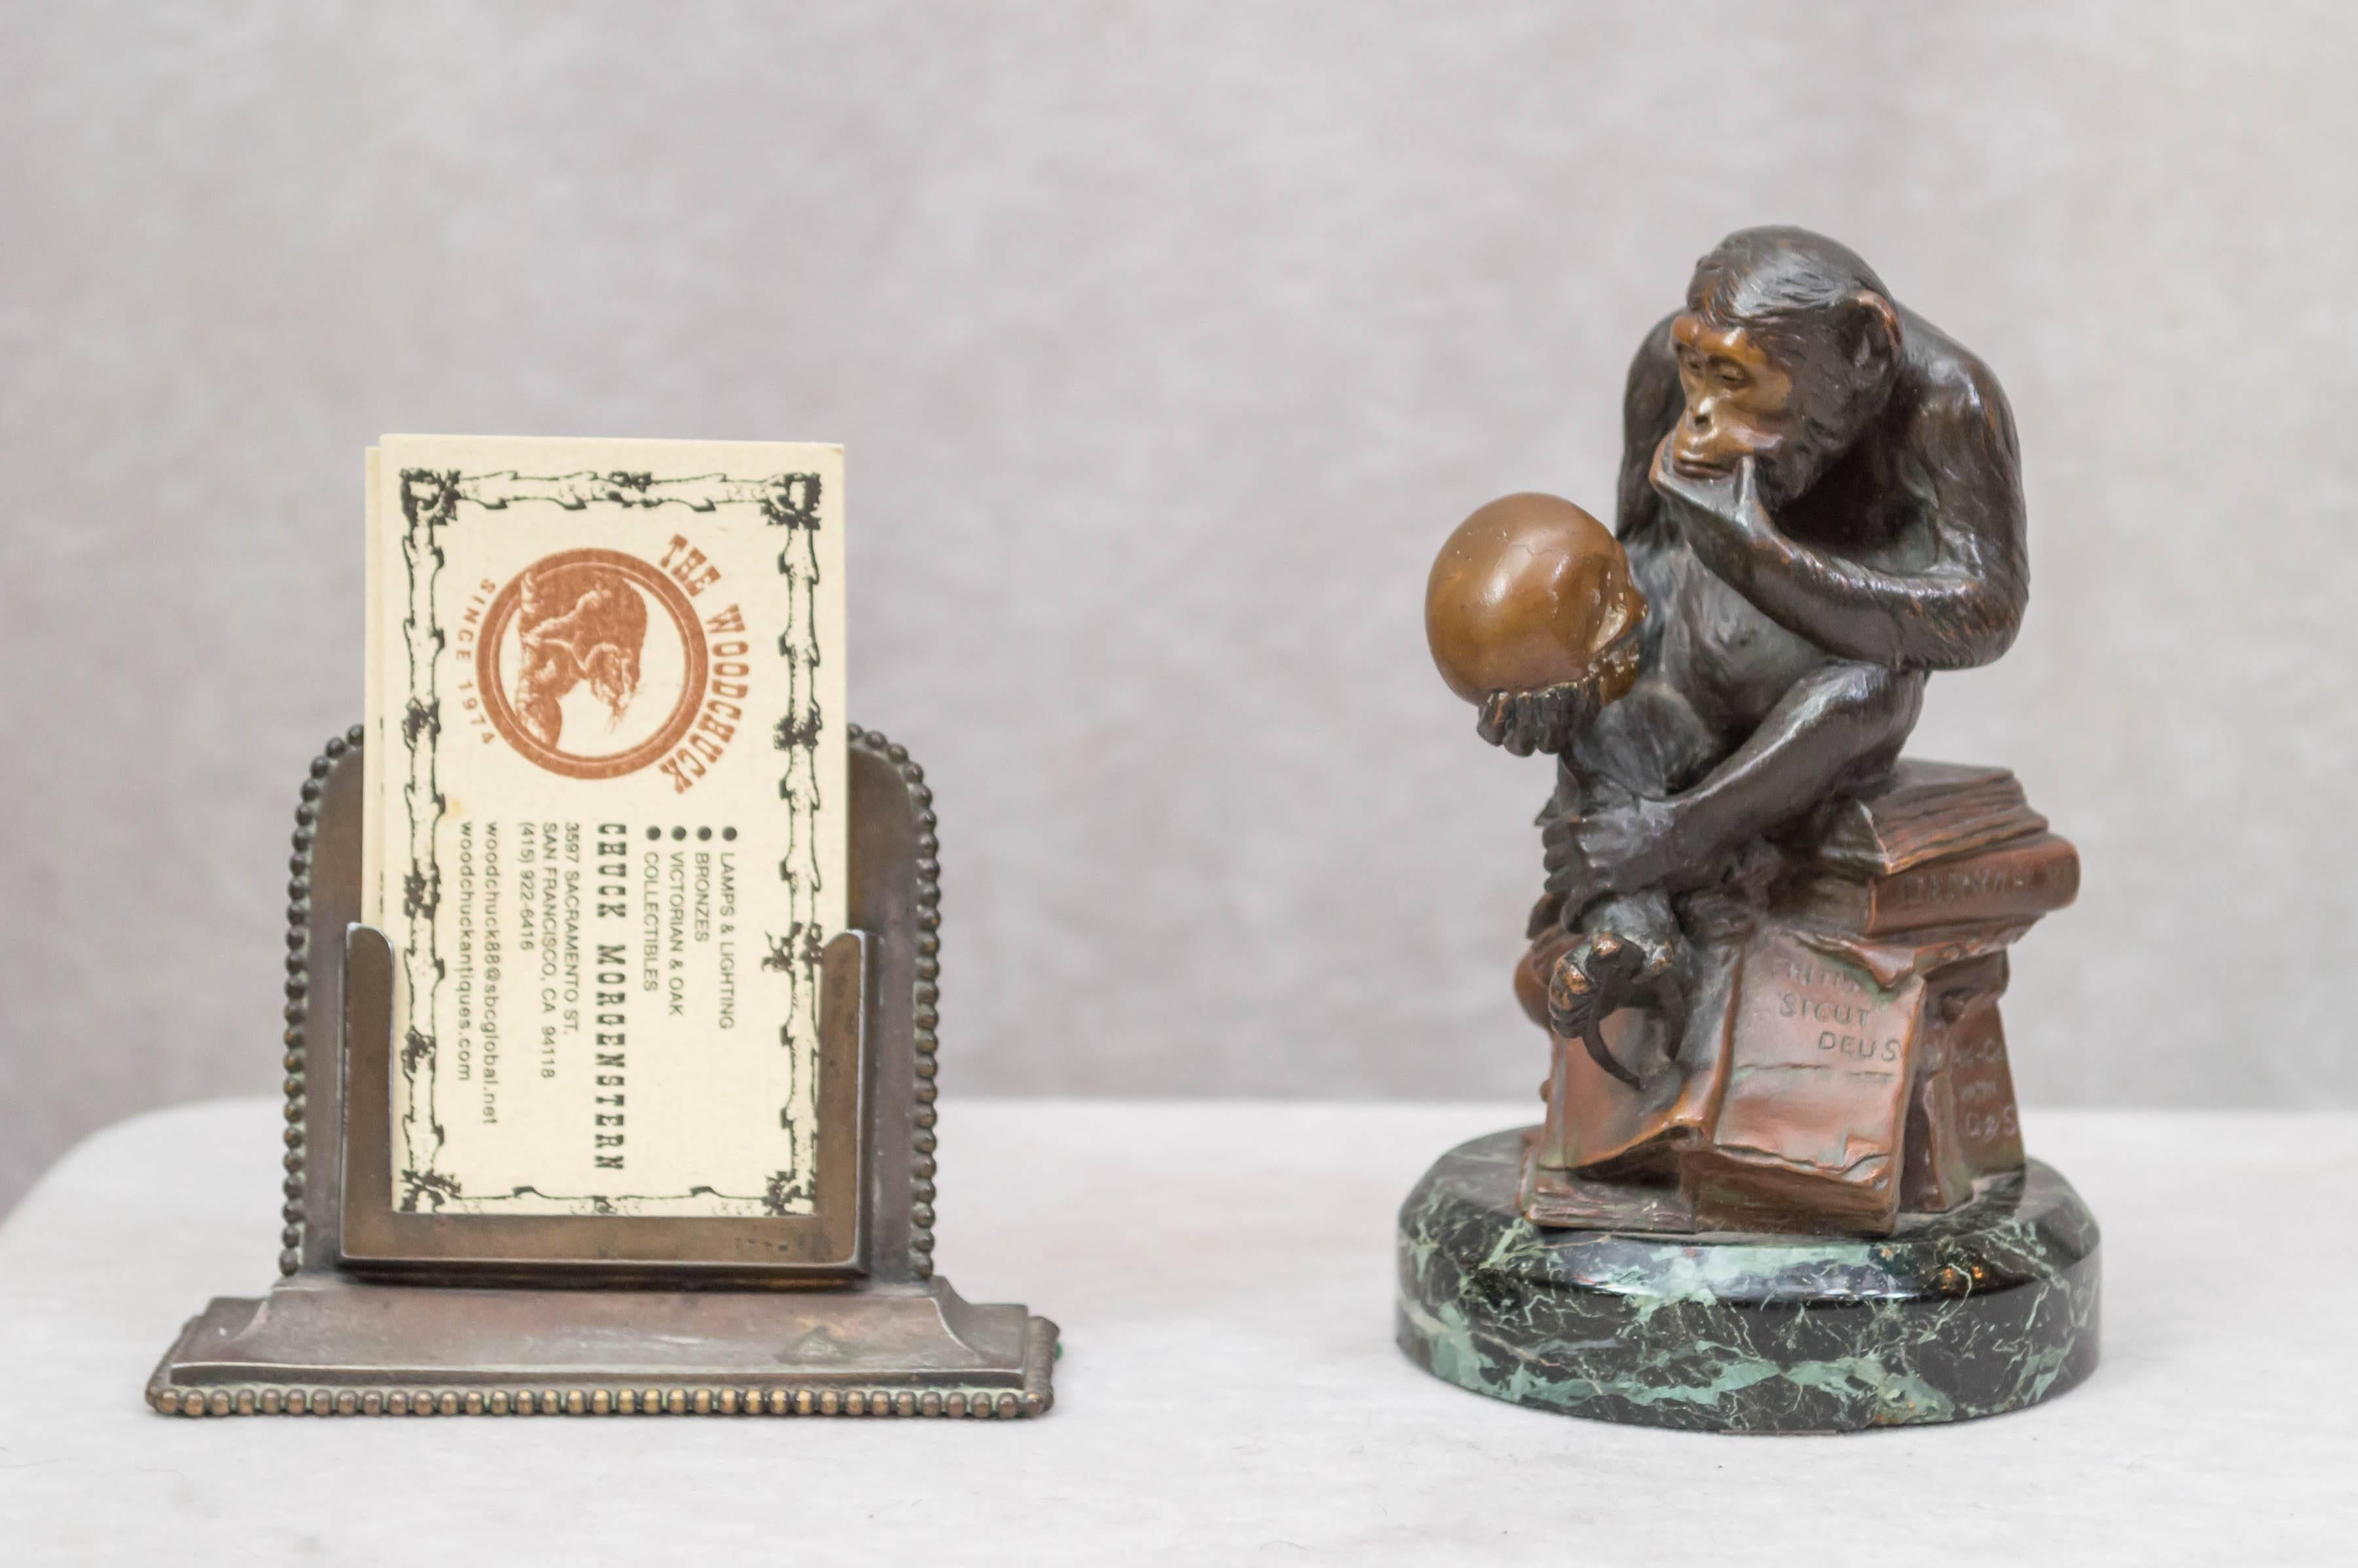 This captivating bronze is indeed the height of whimsy. The seated monkey studies the skull while sitting atop a stack of books including the works of Charles Darwin. He is wondering whether he is an ancestor to the human species. Please note how